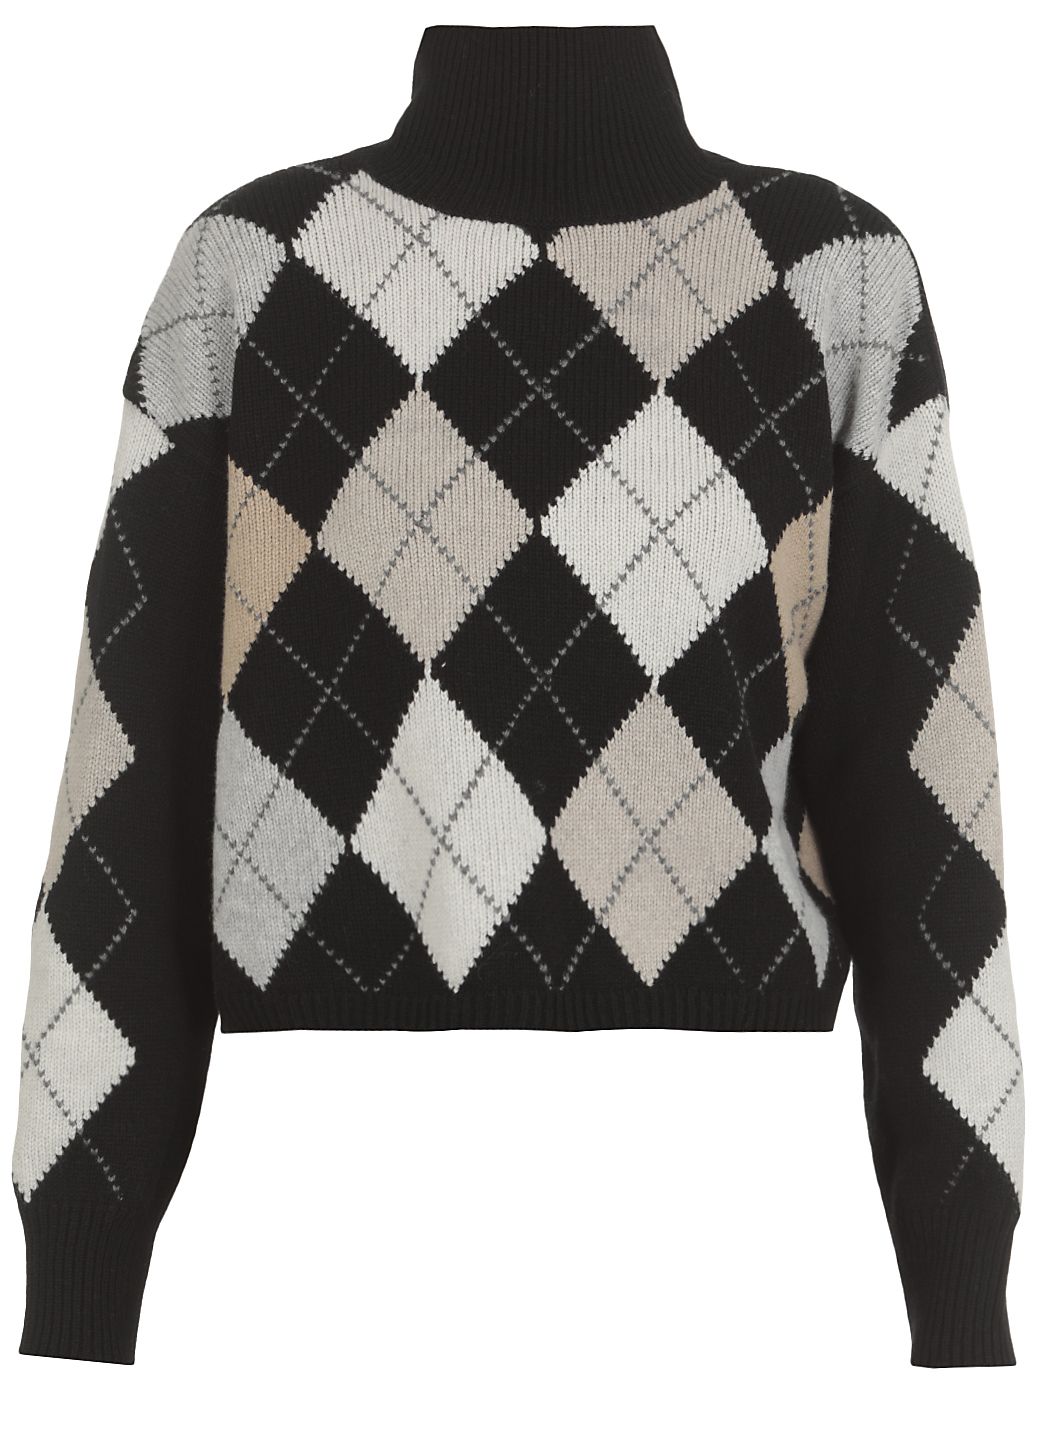 Wool and cashmere checked sweater